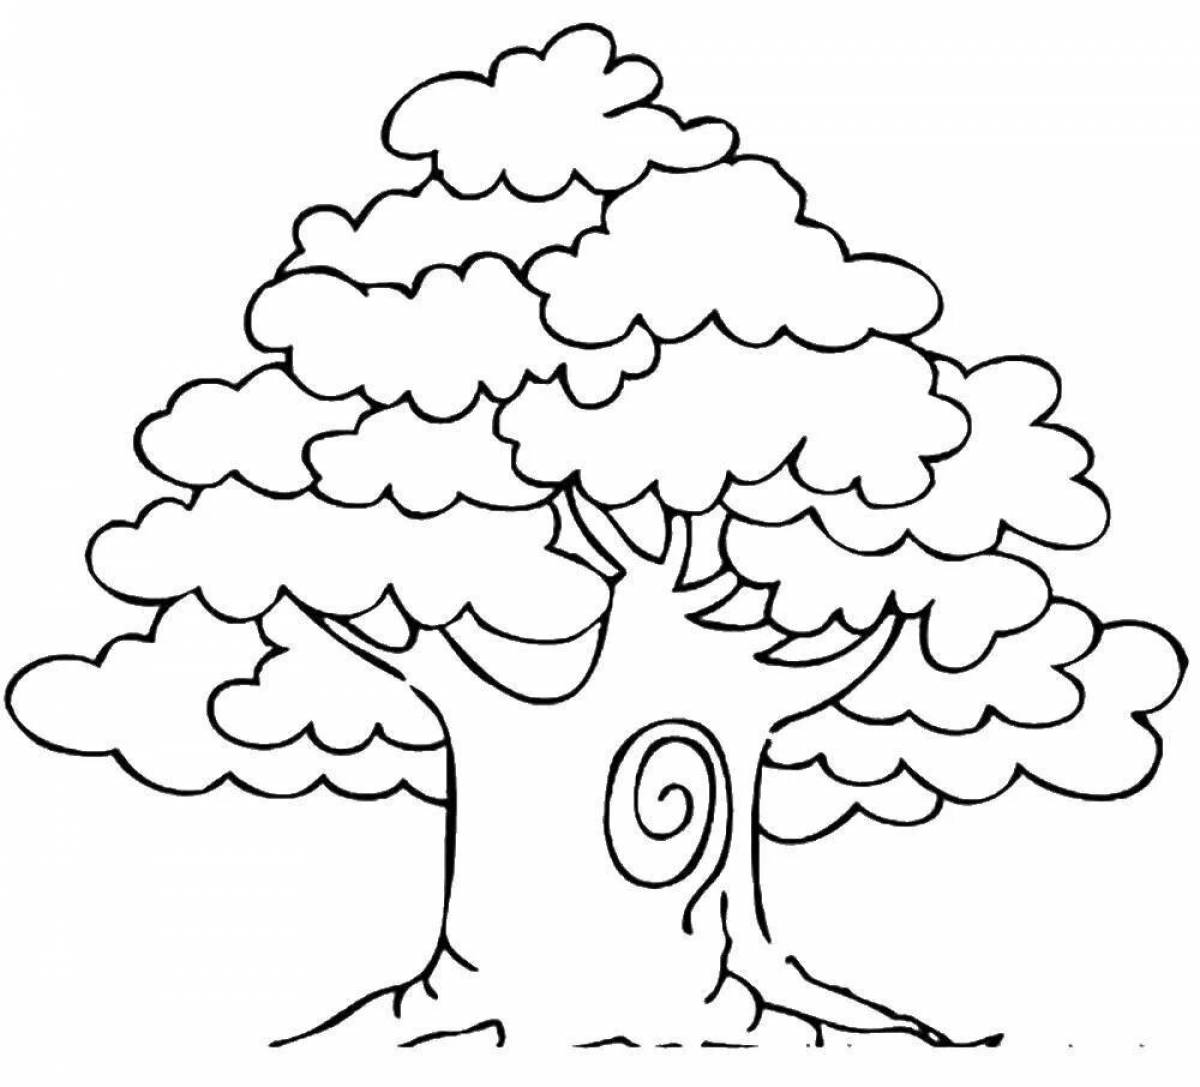 Exquisite tree coloring book for 5-6 year olds